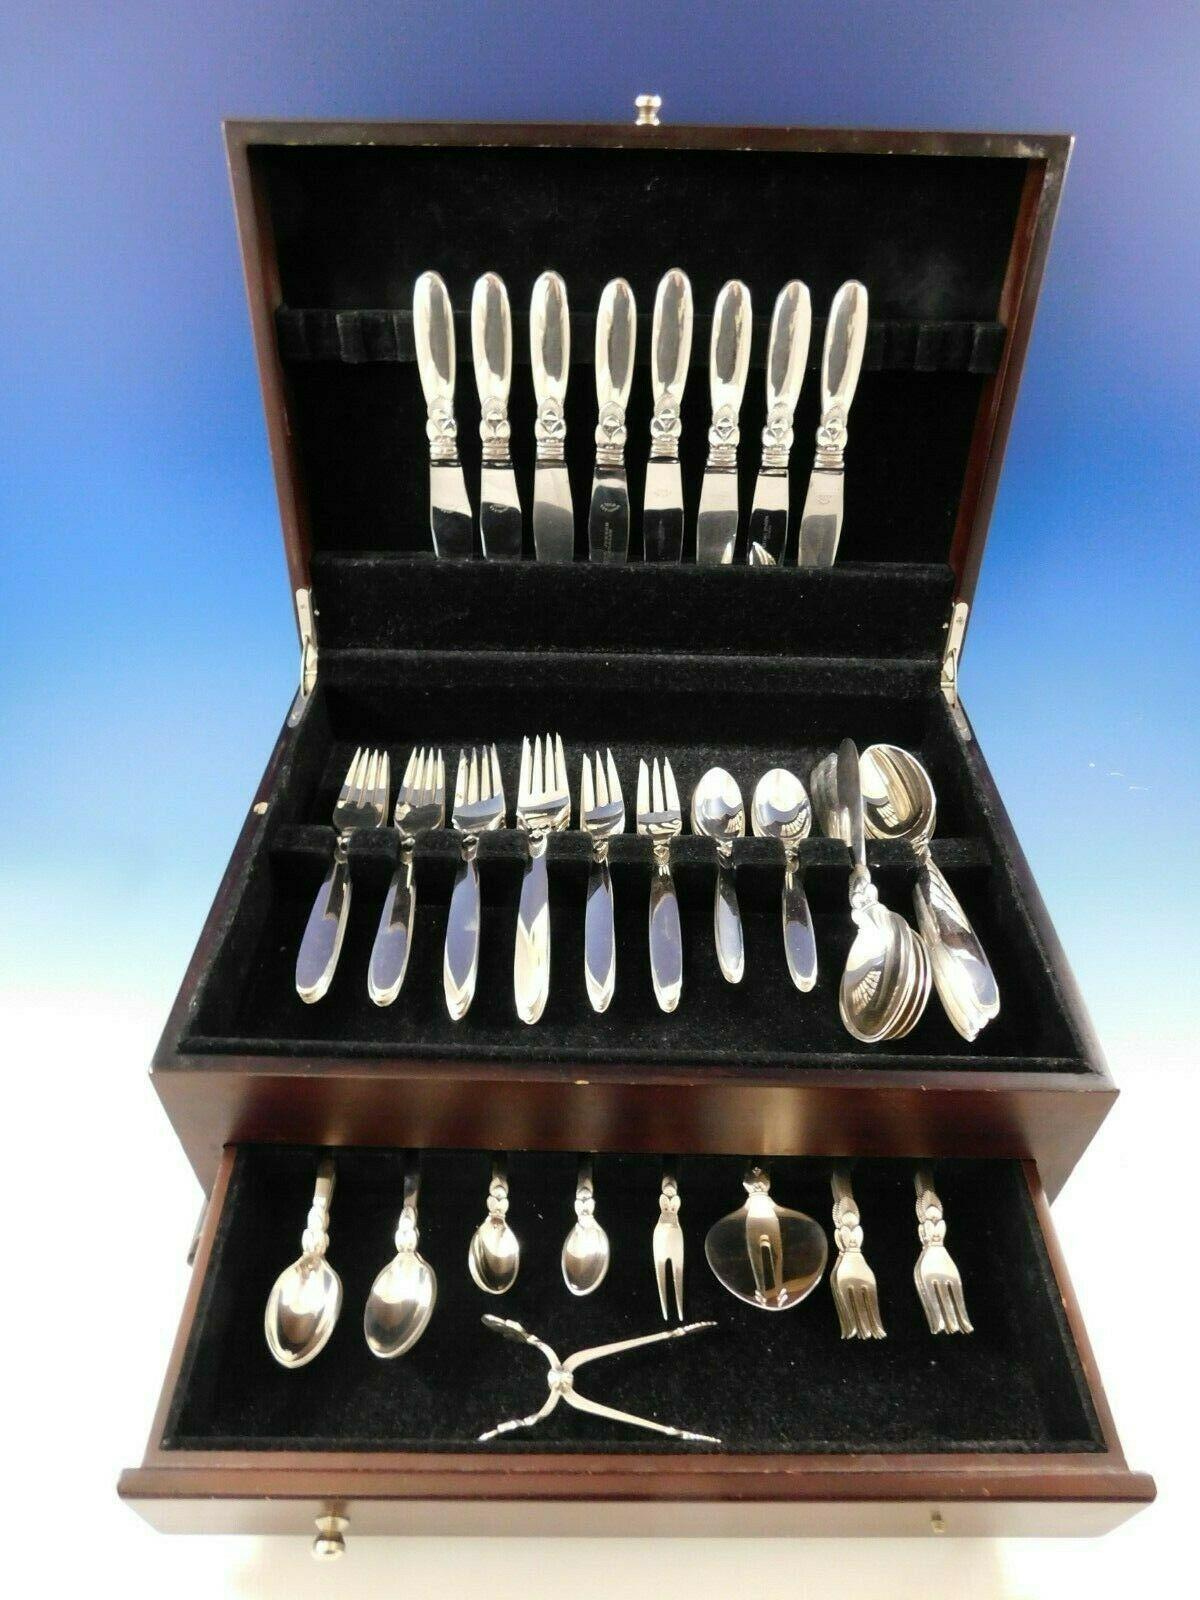 Cactus by Georg Jensen Danish sterling silver flatware set - 68 pieces. This set includes:

8 knives, short handle, 8